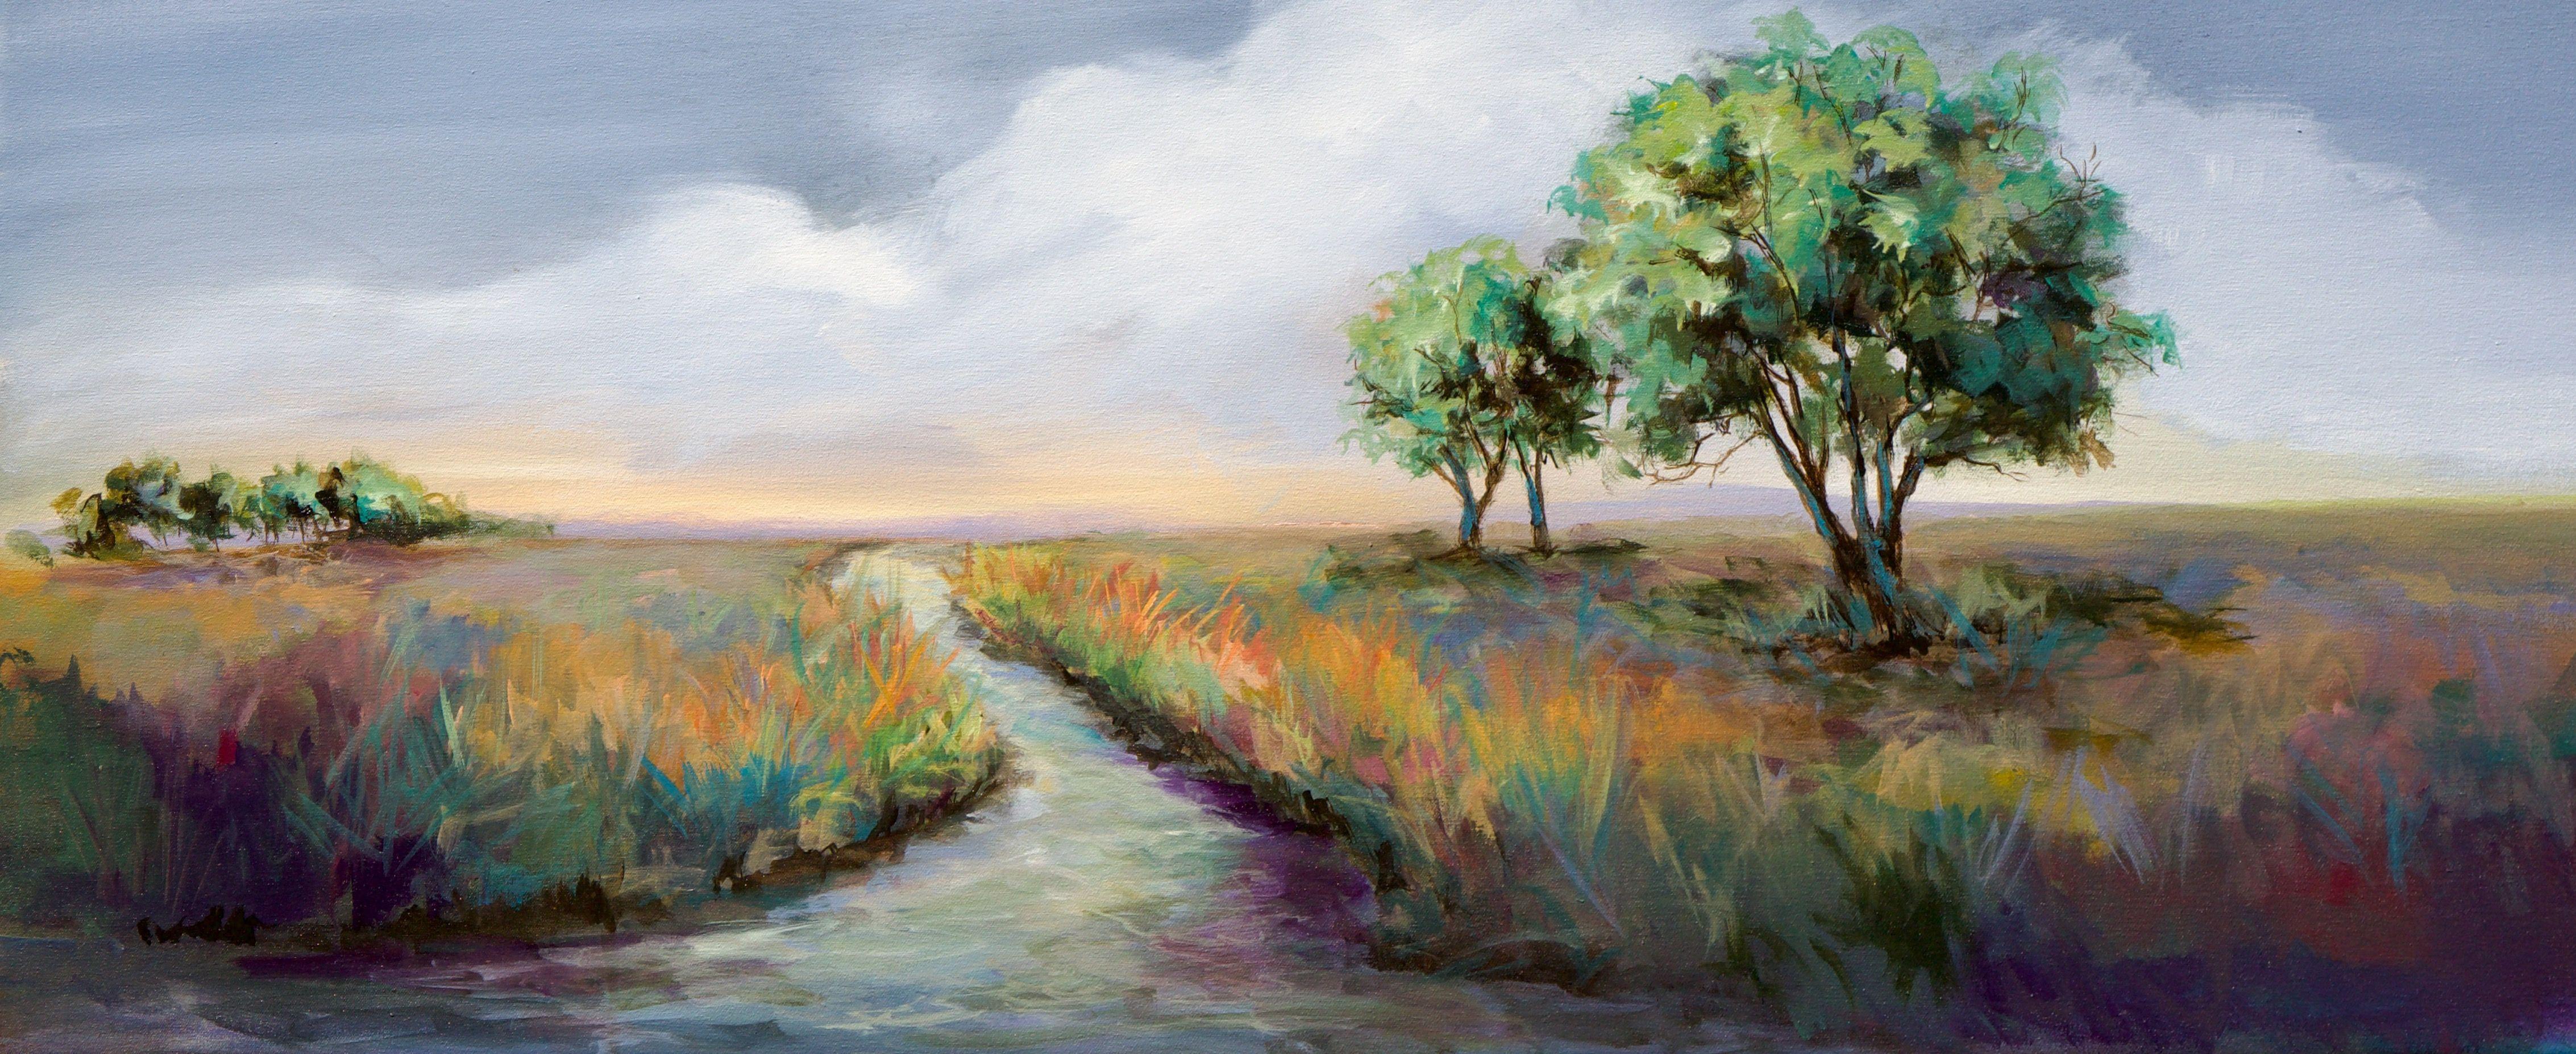 This evocative acrylic landscape is inspired by the artist's trip to the Low Country of South Carolina. Painted on a gallery-wrapped canvas with painted black sides and featuring a clear UV finish for protection, this original artwork has over ten